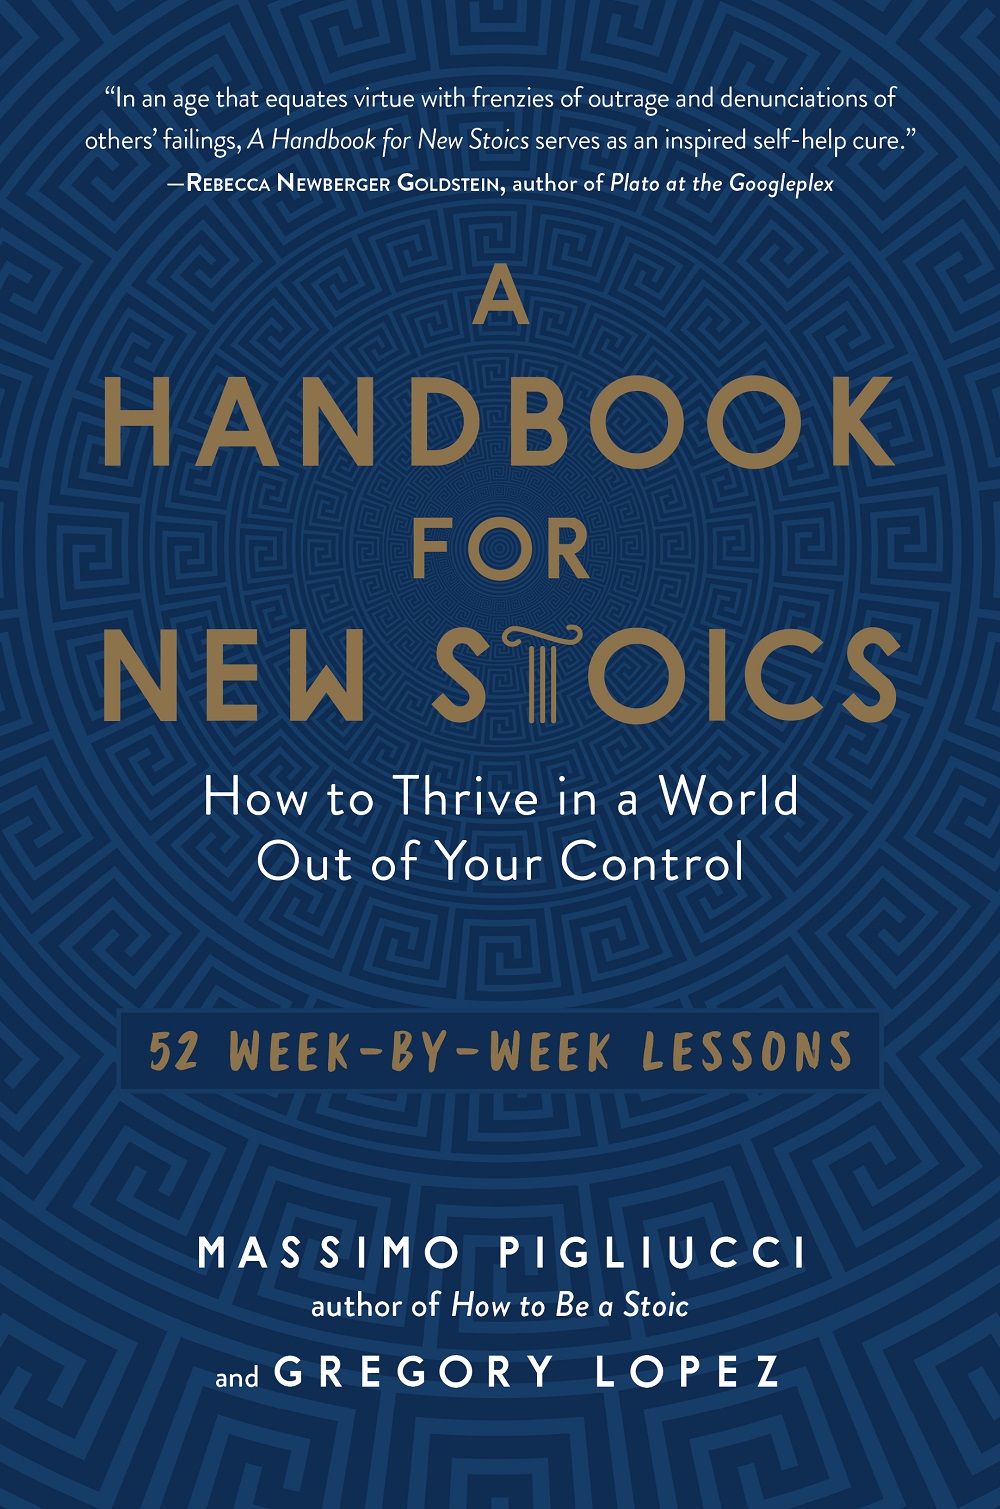 Massimo Pigliucci, Gregory Lopez: Handbook for New Stoics (2019, Experiment LLC, The)